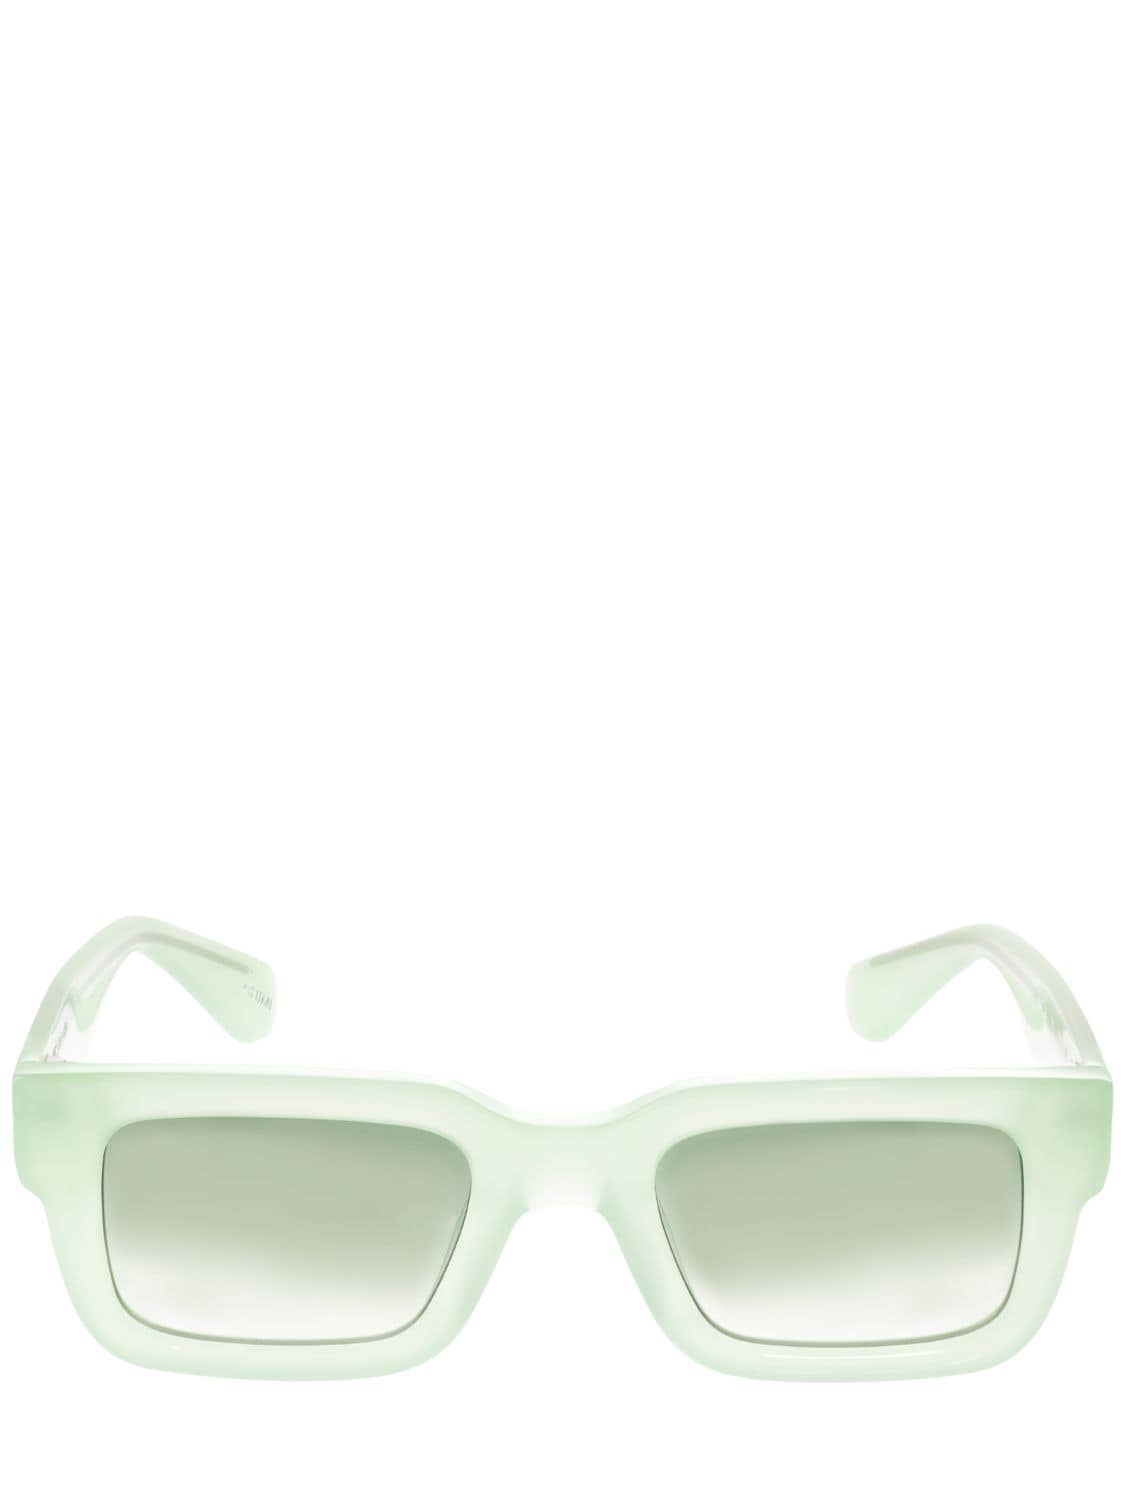 Chimi Lvr Exclusive 05 Squared Sunglasses In Mint